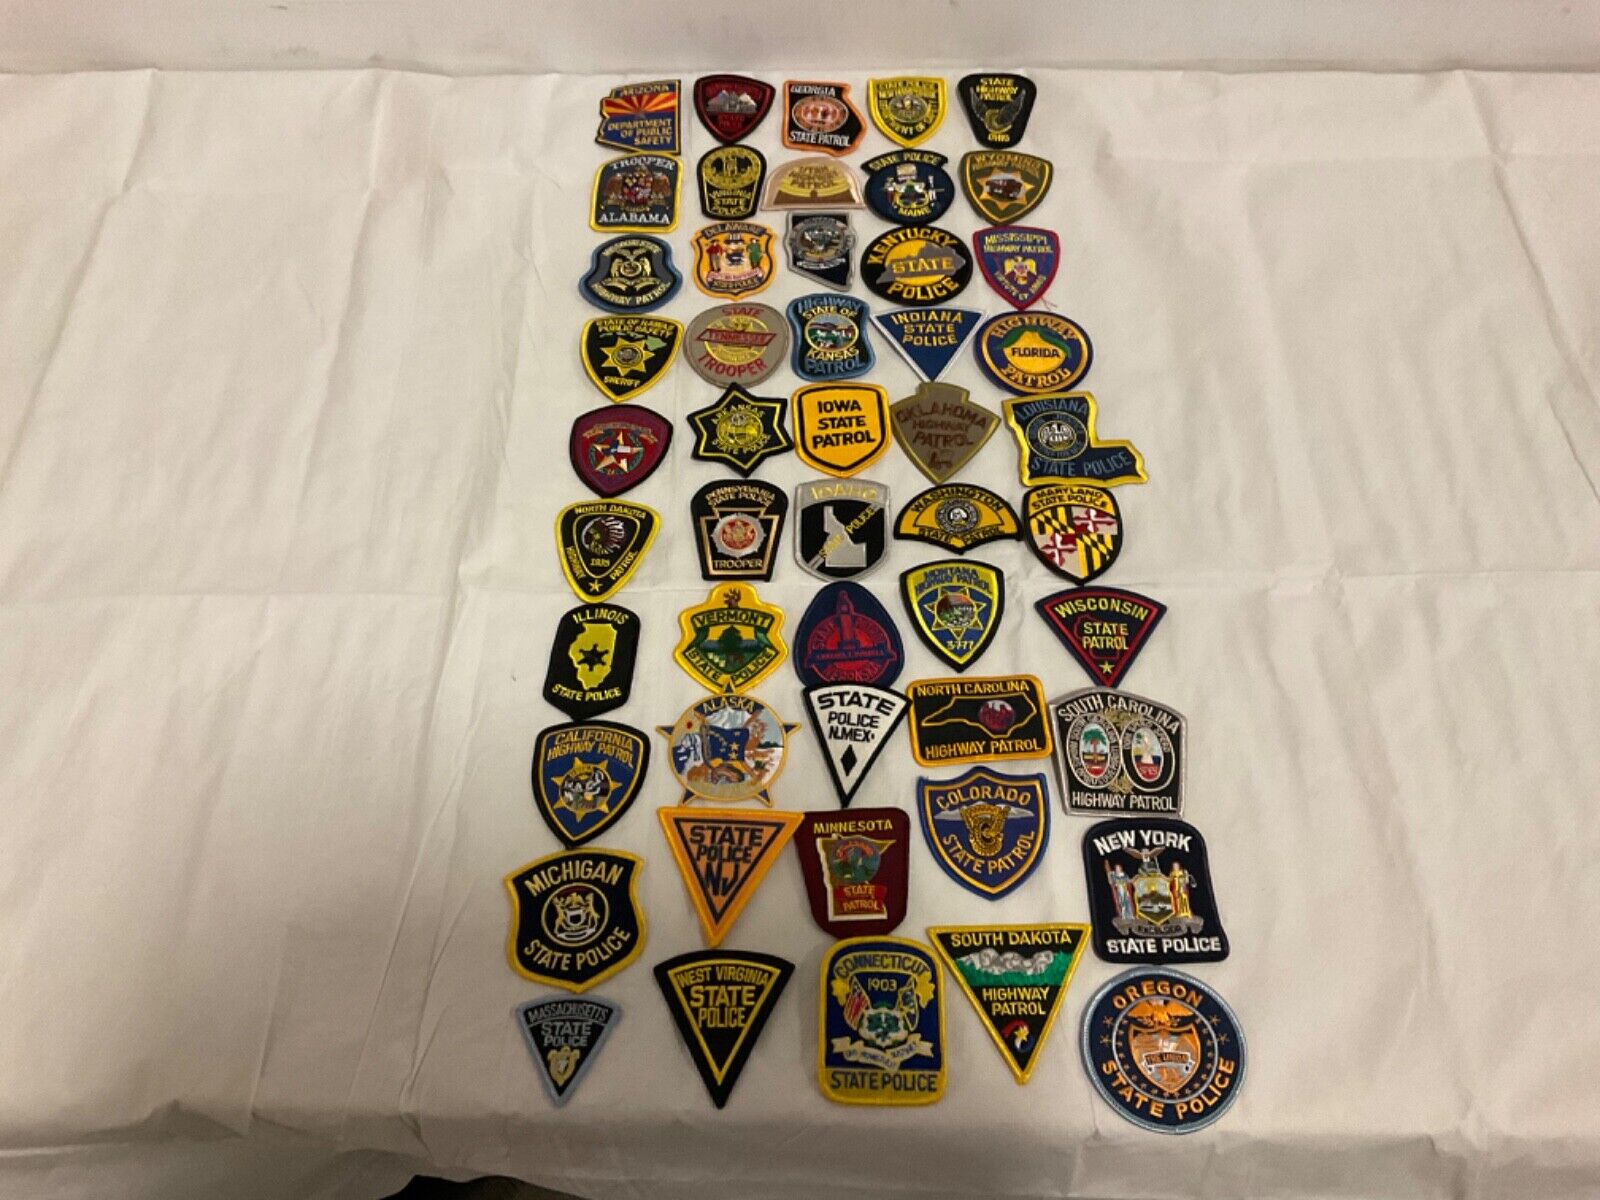 Police collectors patch set 50 pieces all different state patches. All hat size.